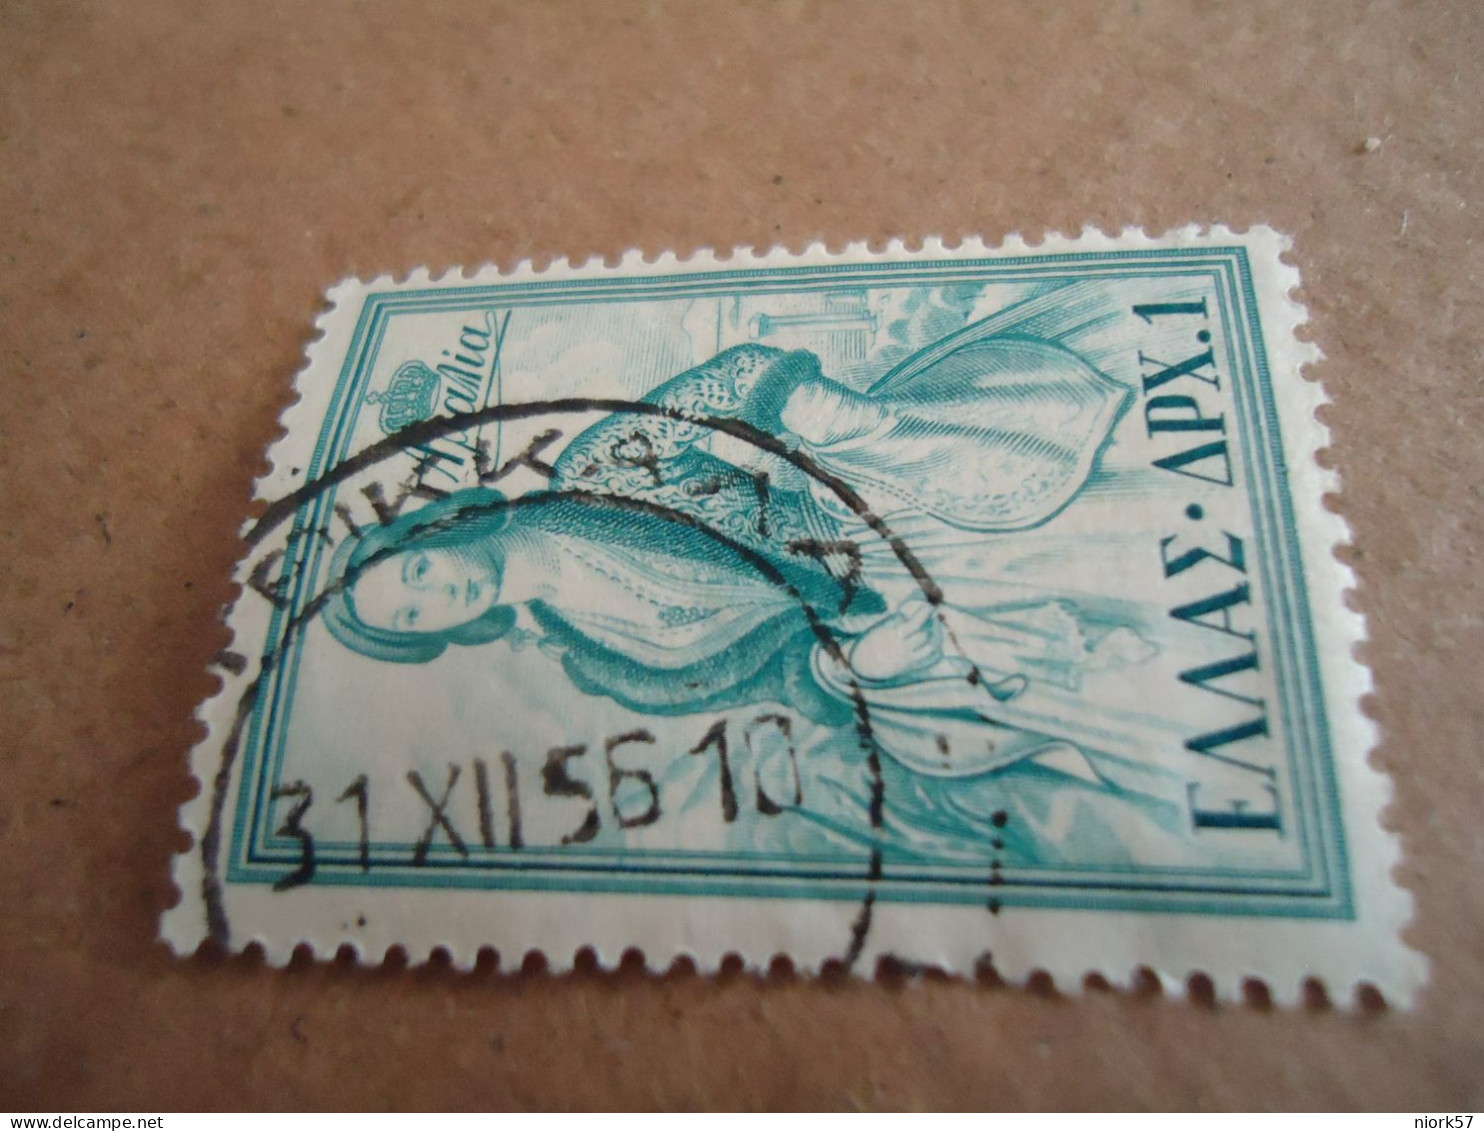 GREECE   POSTMARK ON STAMPS   ΤΡΙΚΚΑΛΑ 1956 - Affrancature Meccaniche Rosse (EMA)